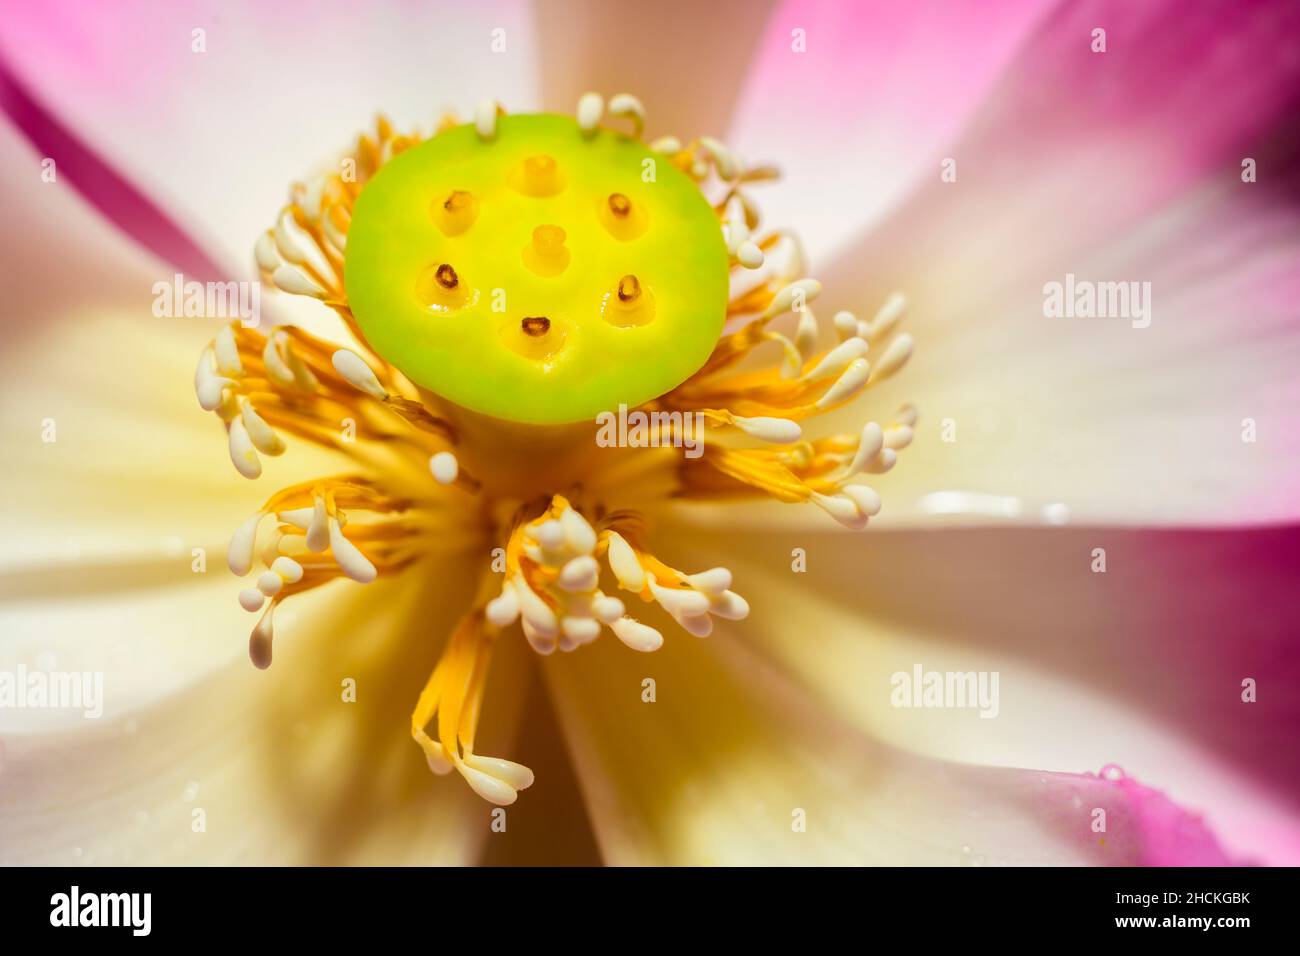 Lotus flower macro photograph, Seed capsule, and stamen close up. Stock Photo